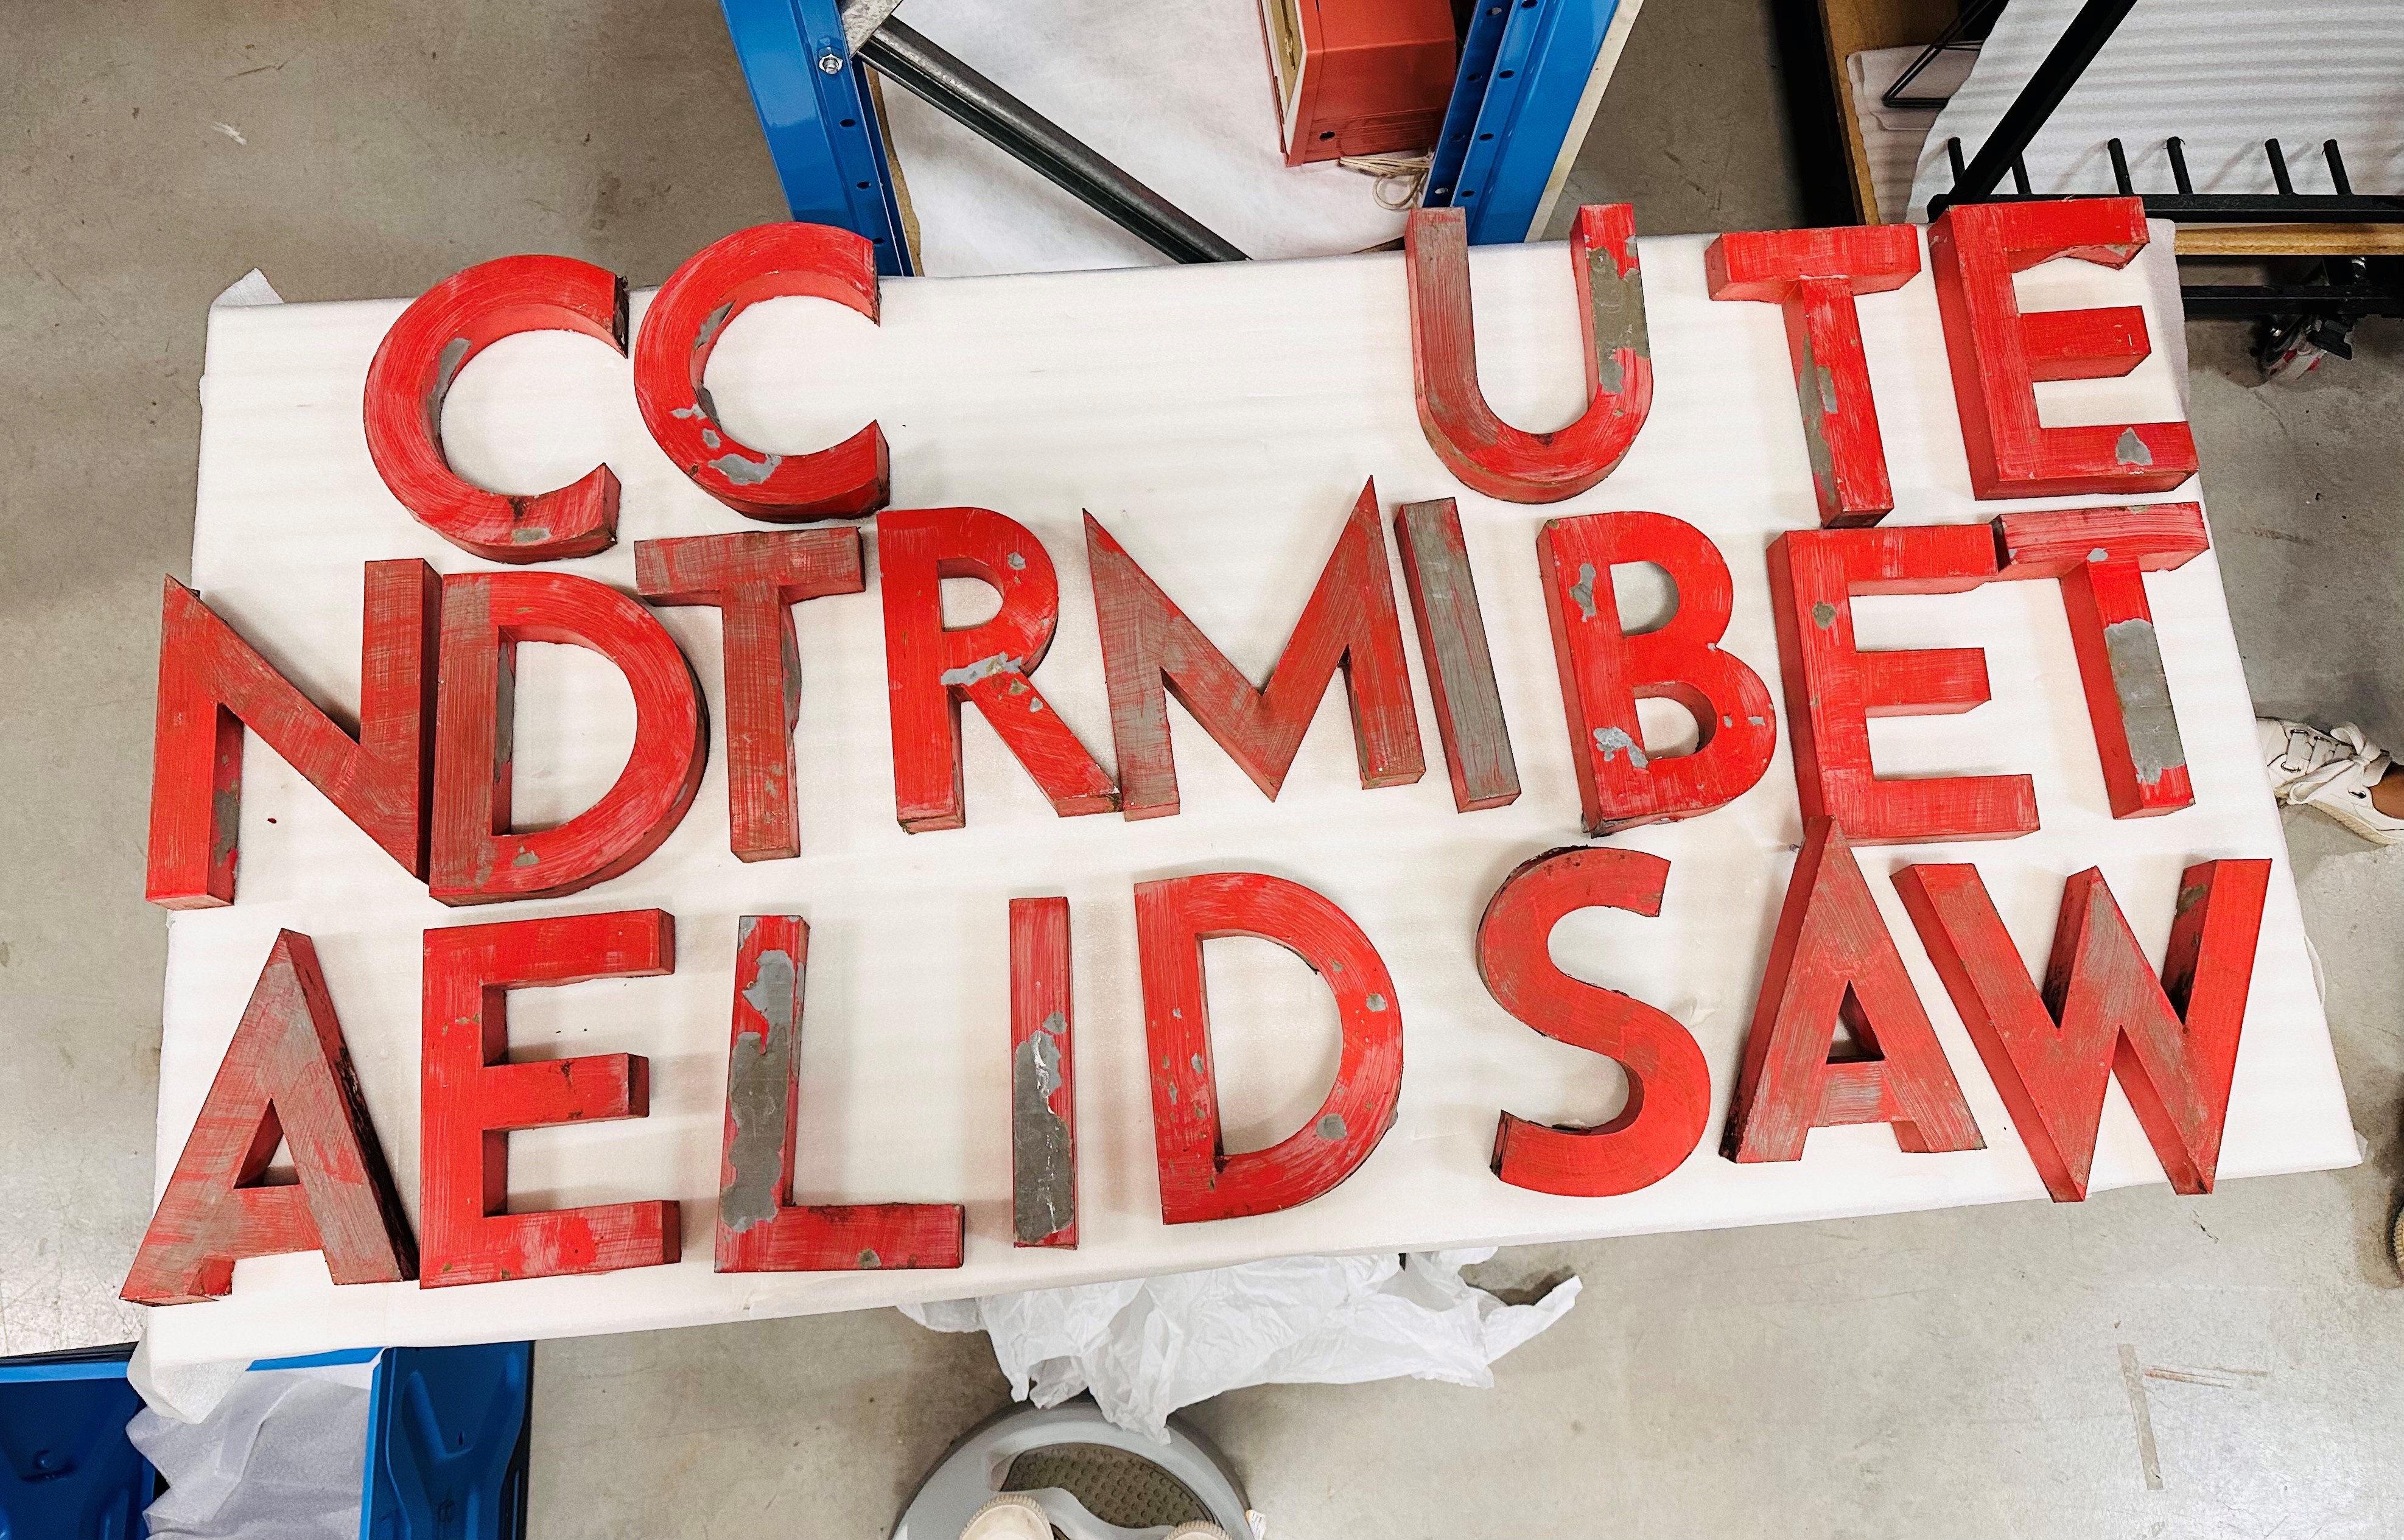 CCUTENDTRMIBETAELIDSAW these are the red tin letters that need solving.